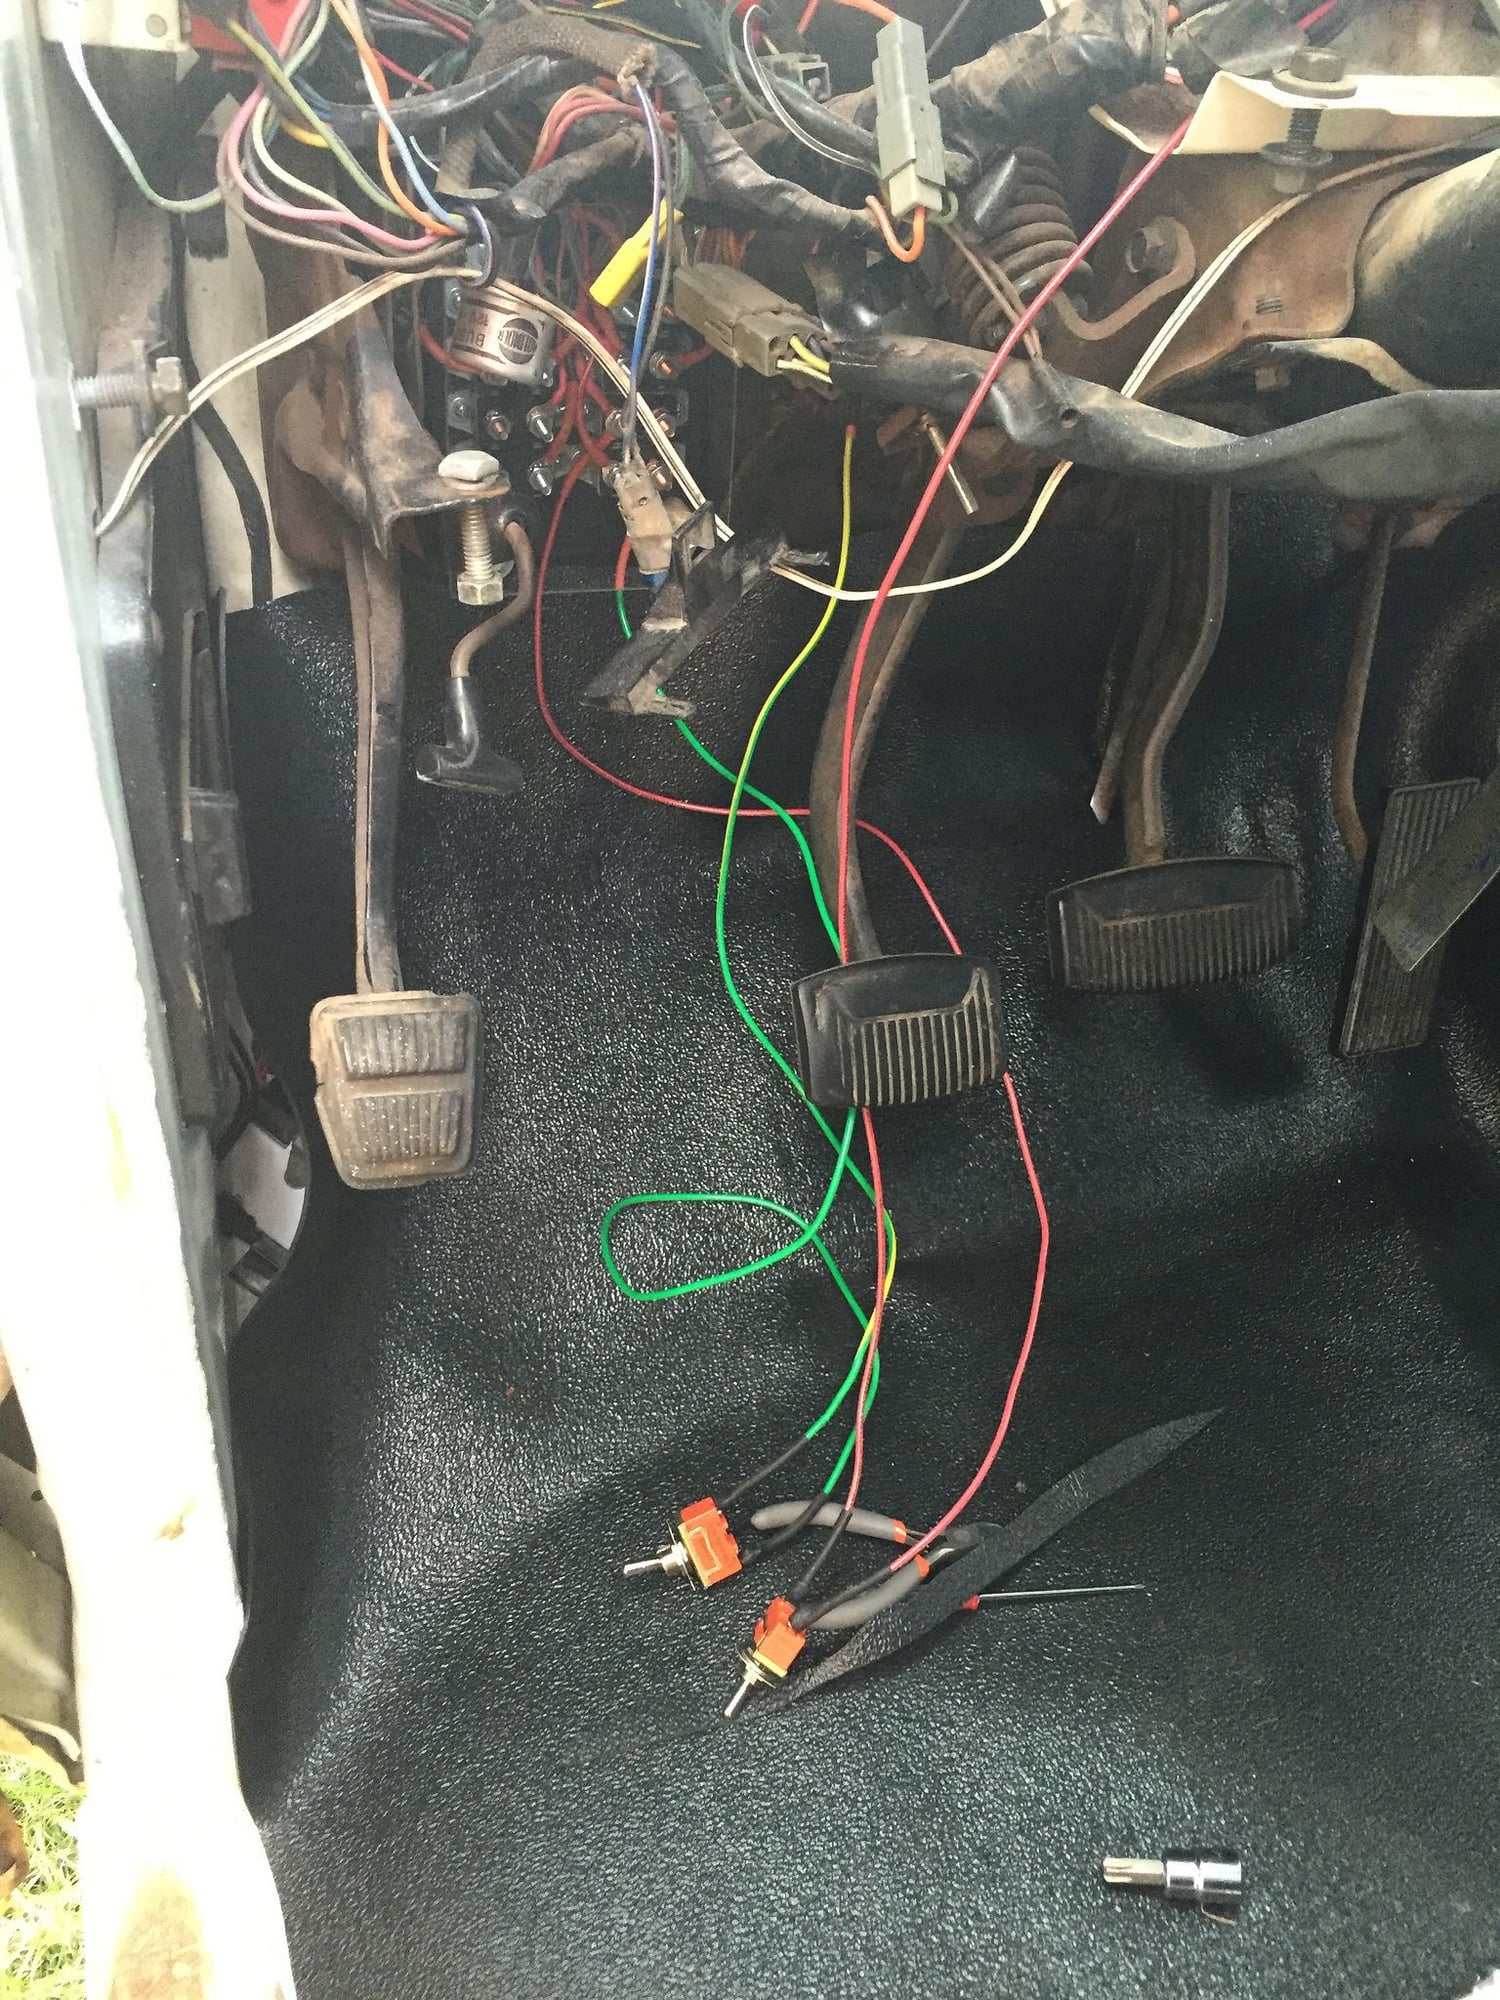 Ideas to waterproof/enclose fuse box? - Ford Truck Enthusiasts Forums